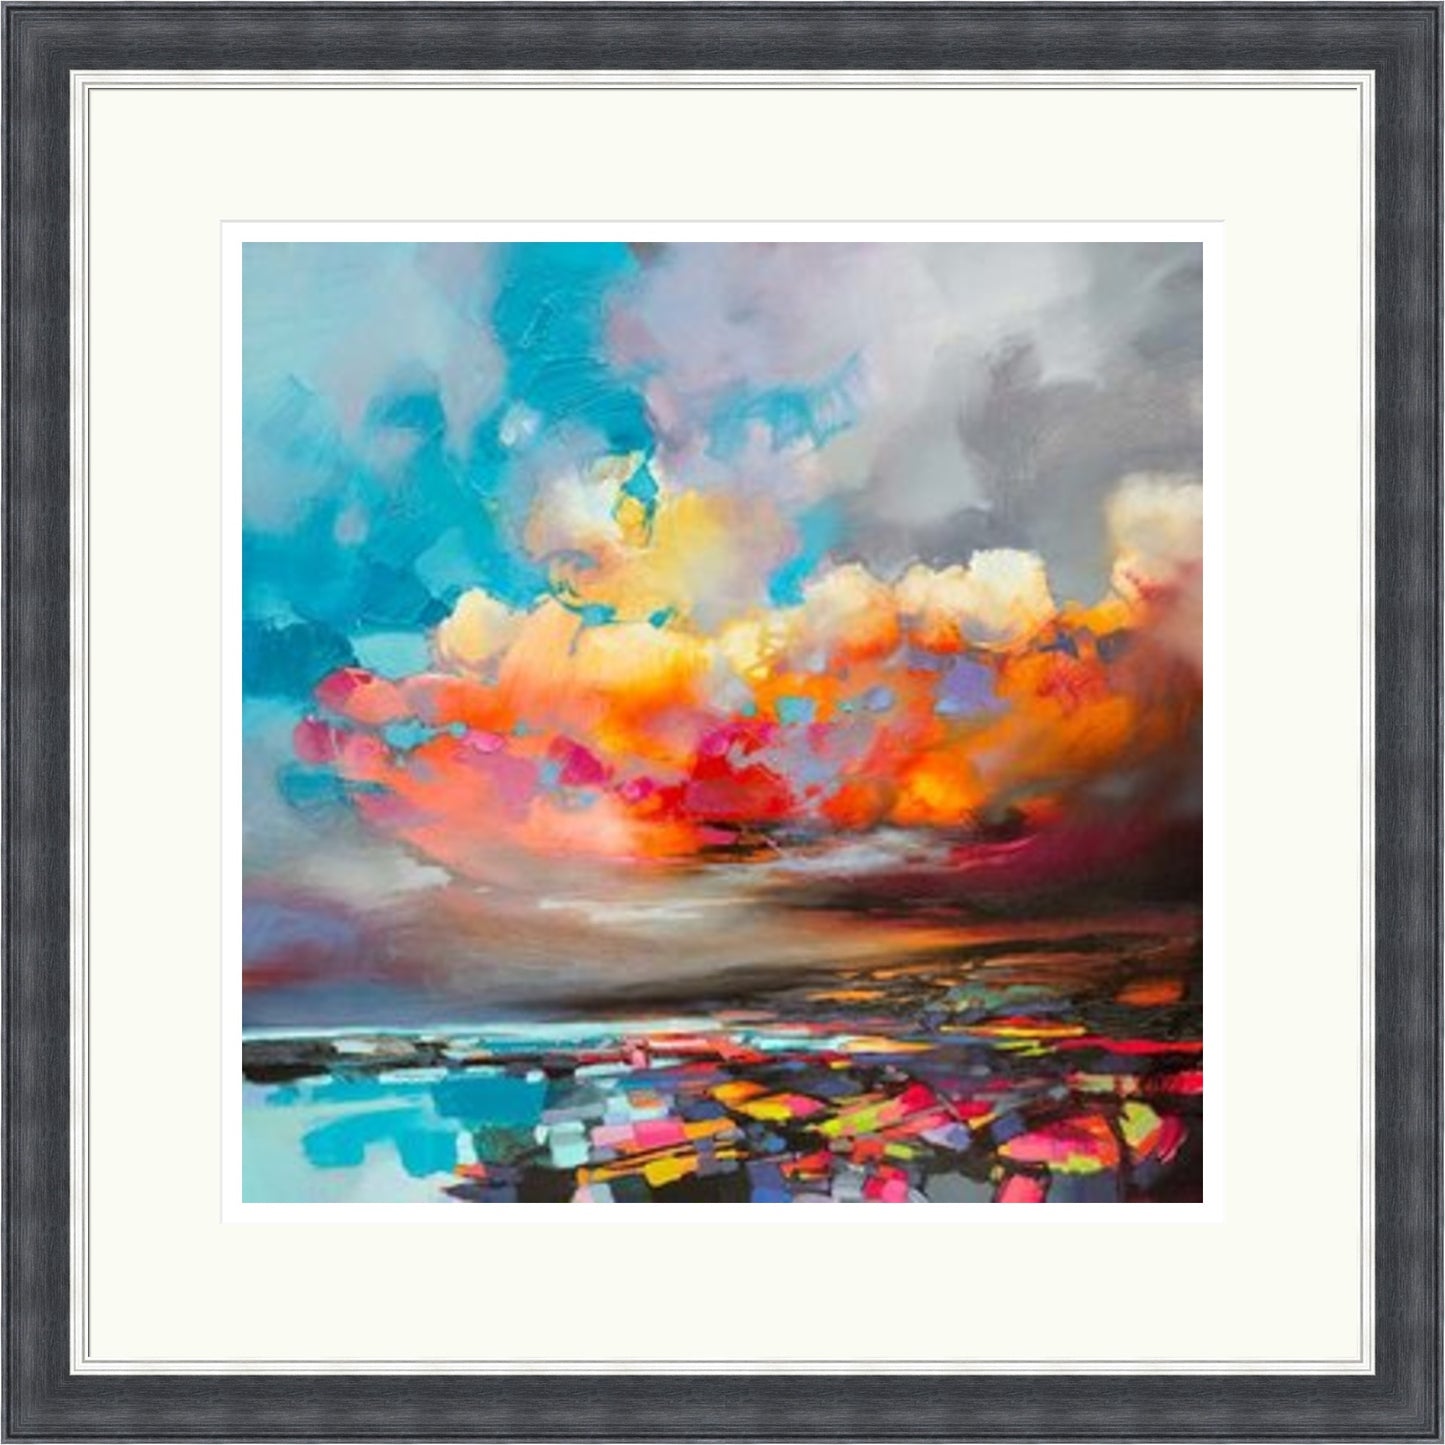 Fragmented (Limited Edition) by Scott Naismith